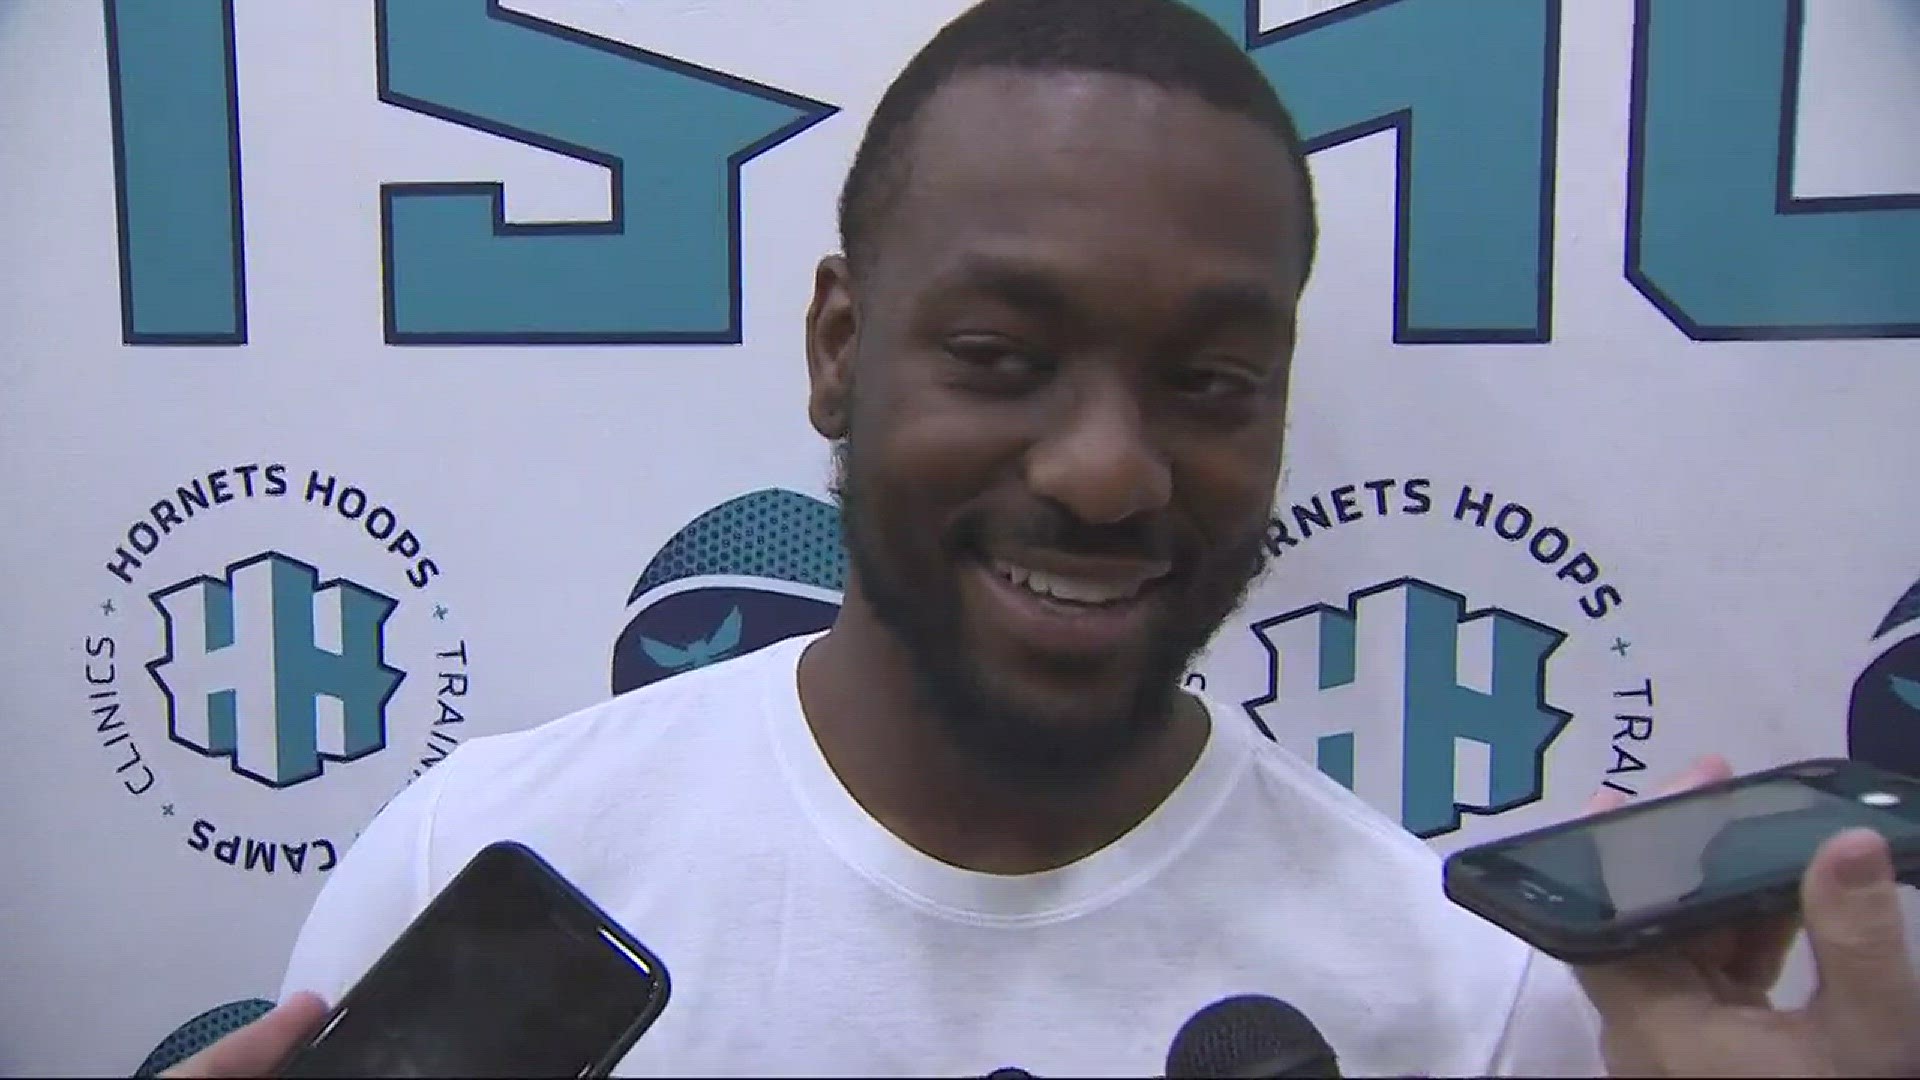 Hornets guard Kemba Walker said he made it a point to encourage team management to sign free agent guard Michael Carter-Williams for this season.